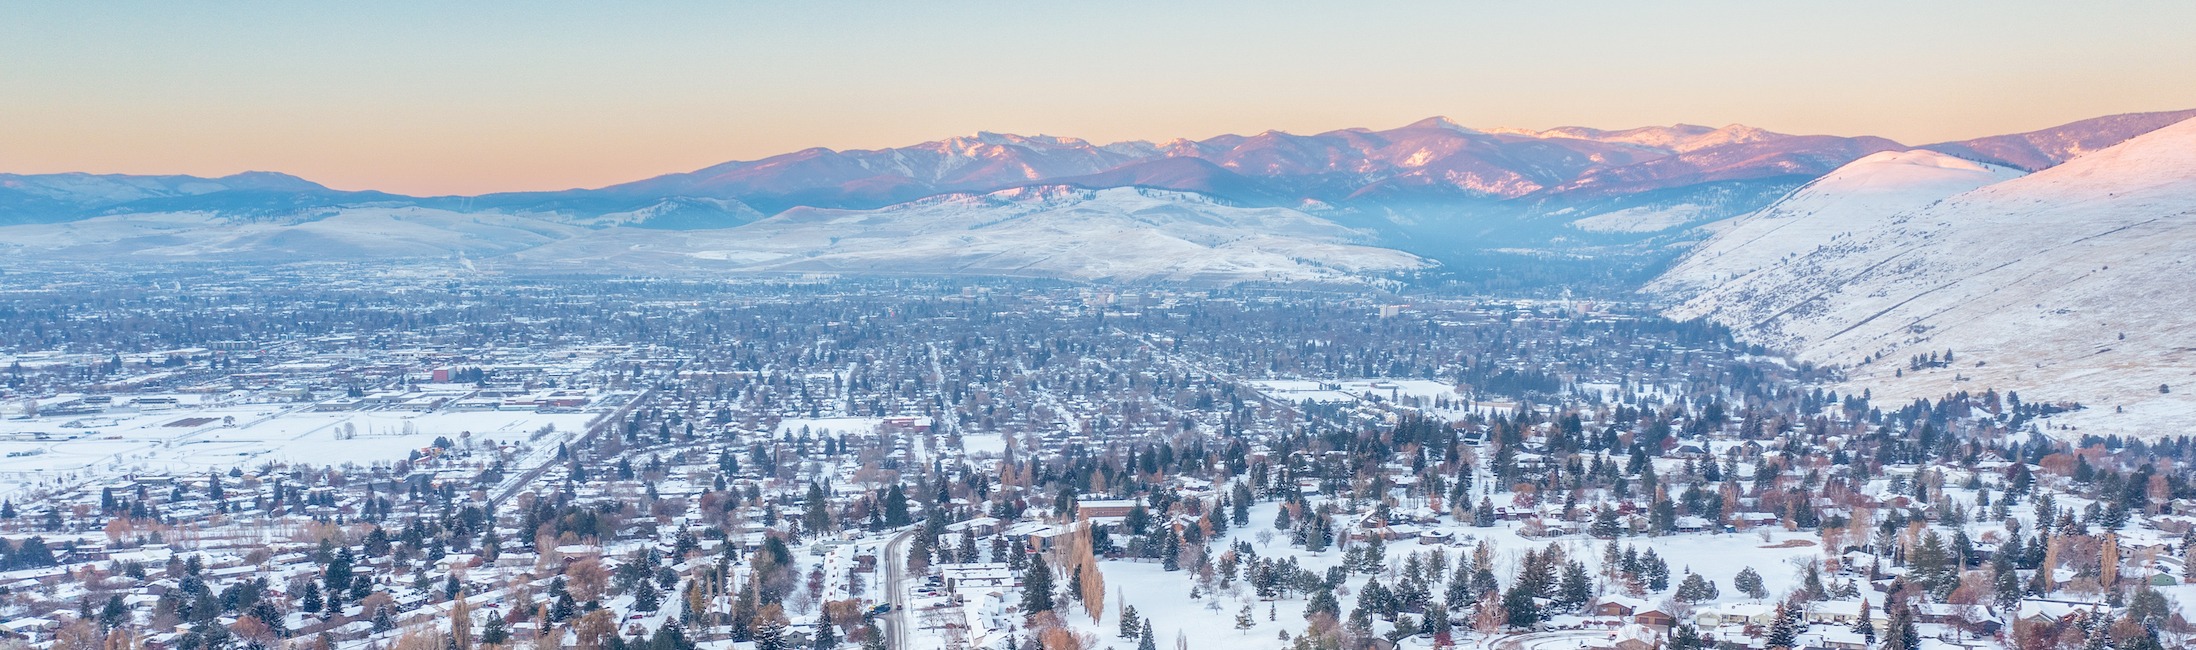 10 Pictures of Winter in Missoula That Will Wow You